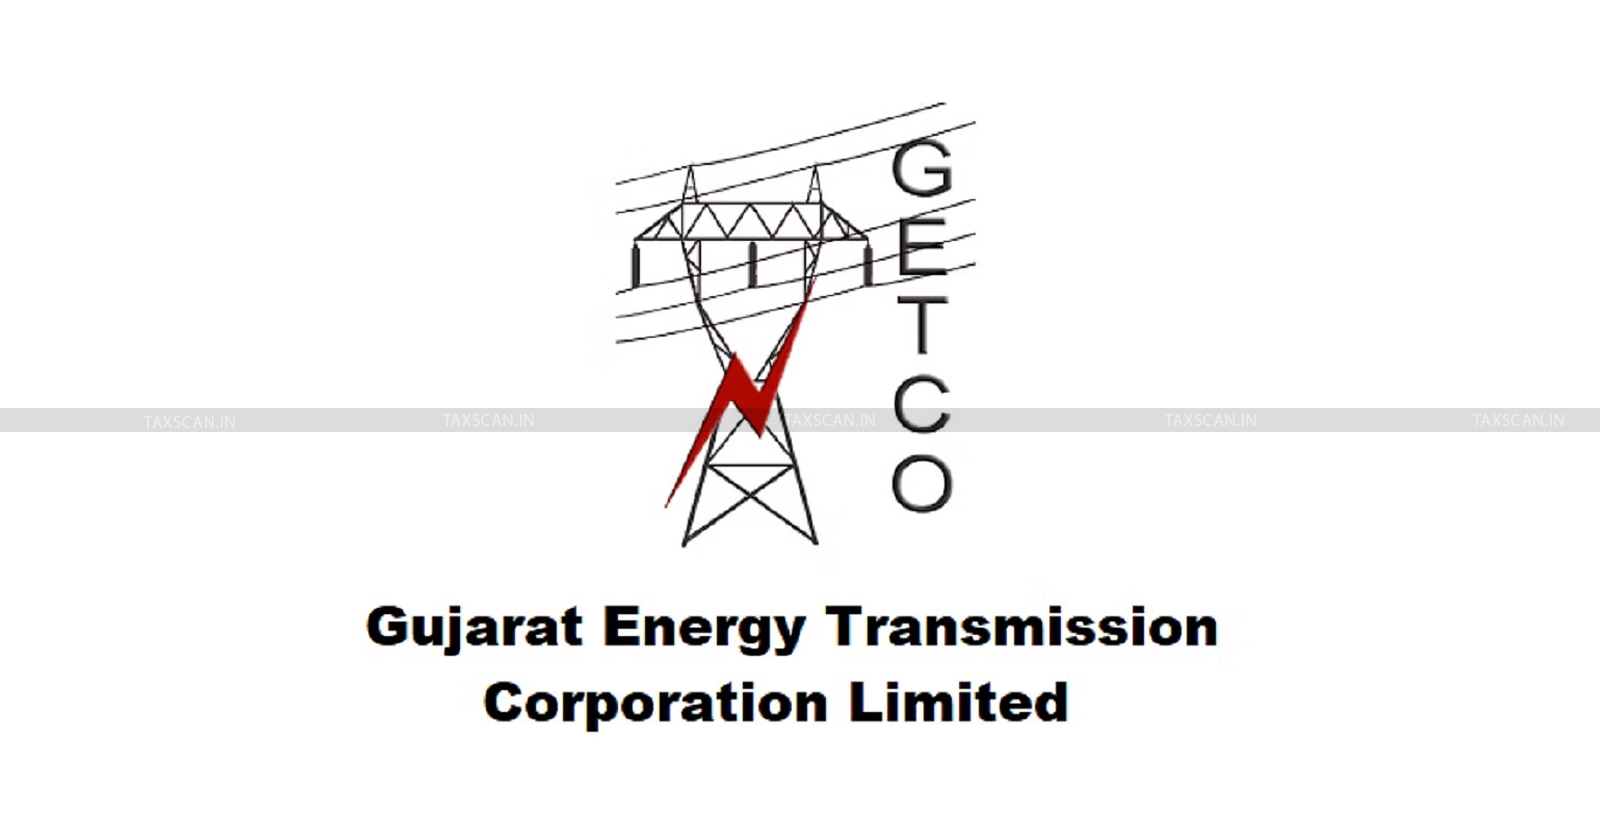 Service Tax - Leviable on Service - Transmission of Electricity - GETCO - CESTAT - gtaxscan